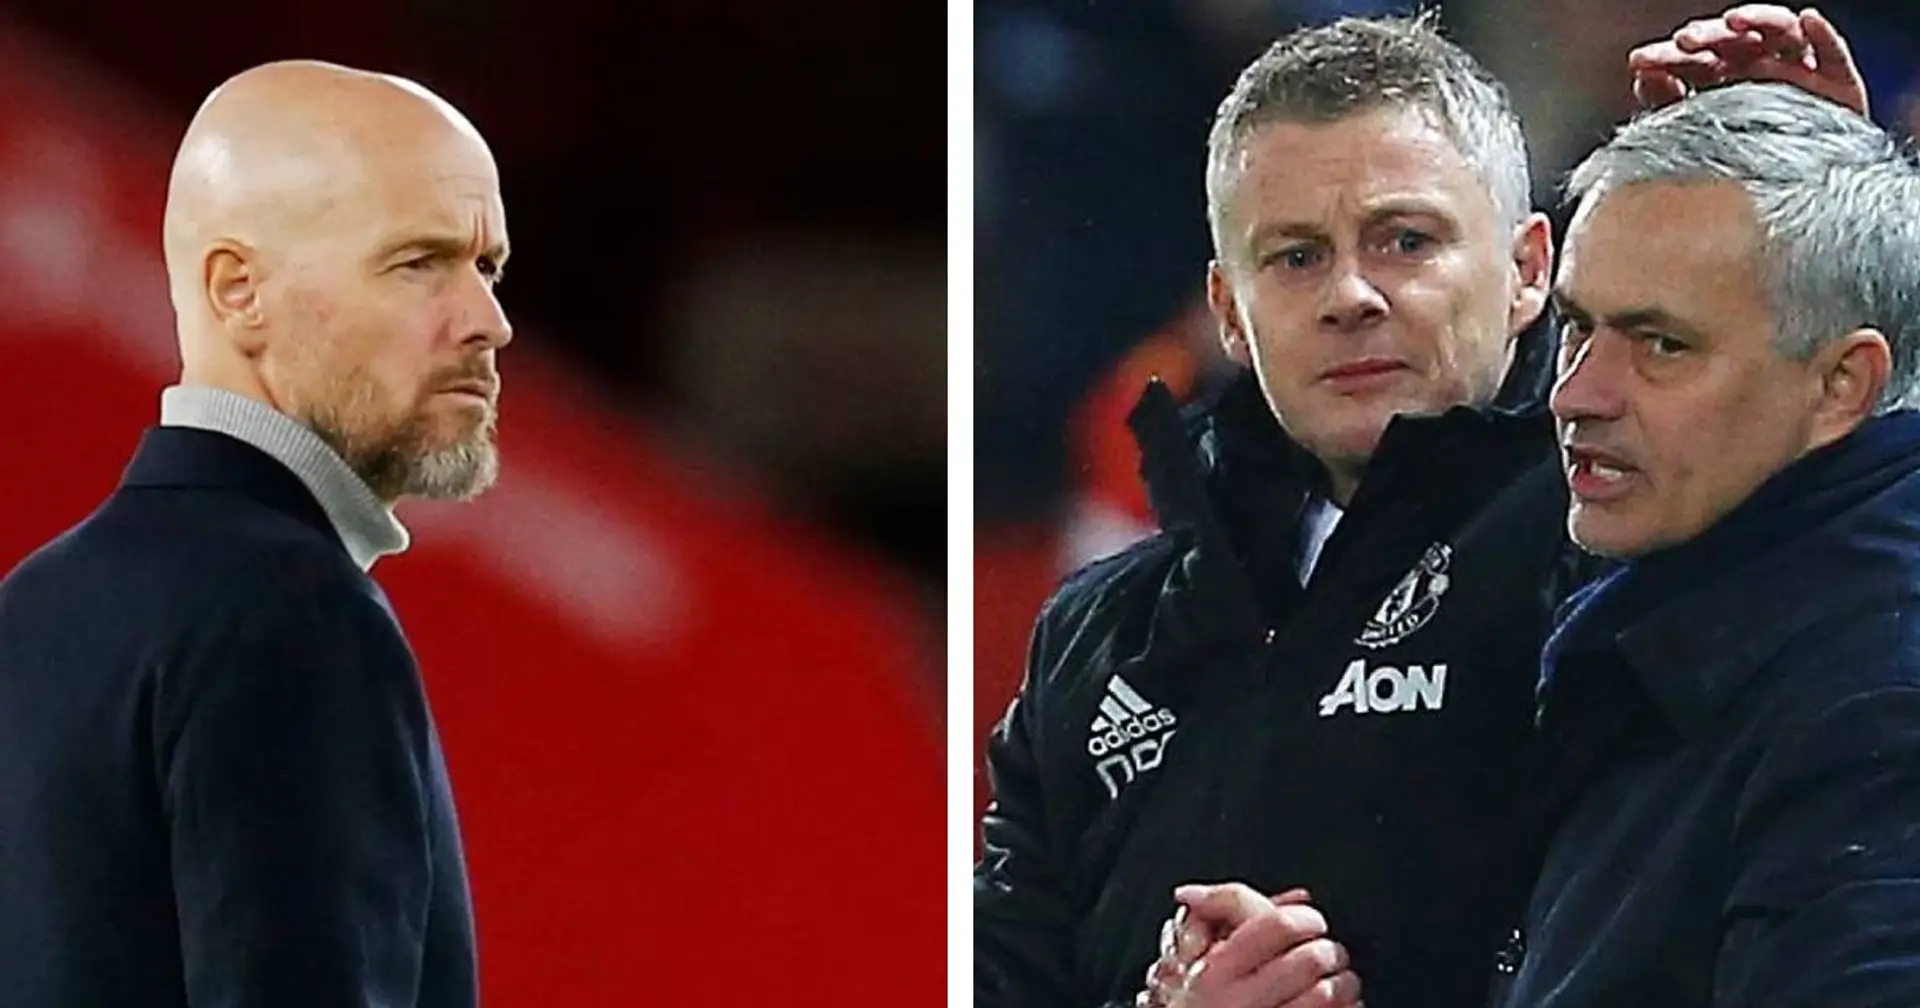 Carragher: 'Ten Hag no different from Ole and Jose. Man United stale & going backwards'